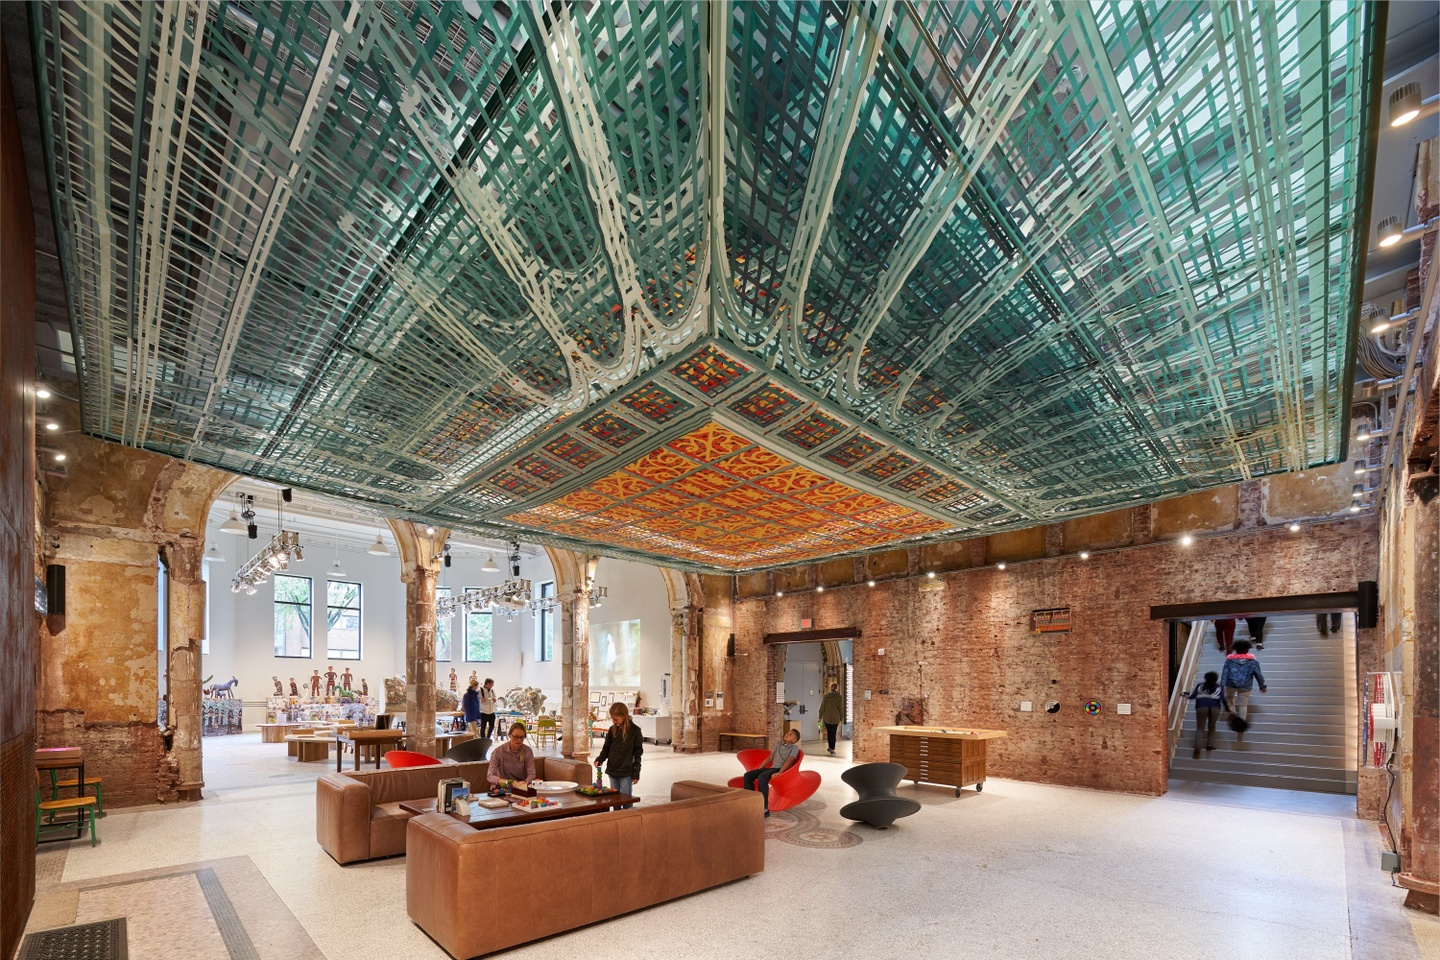 image of Children’s Museum of Pittsburgh lobby with woven greens on the ceiling